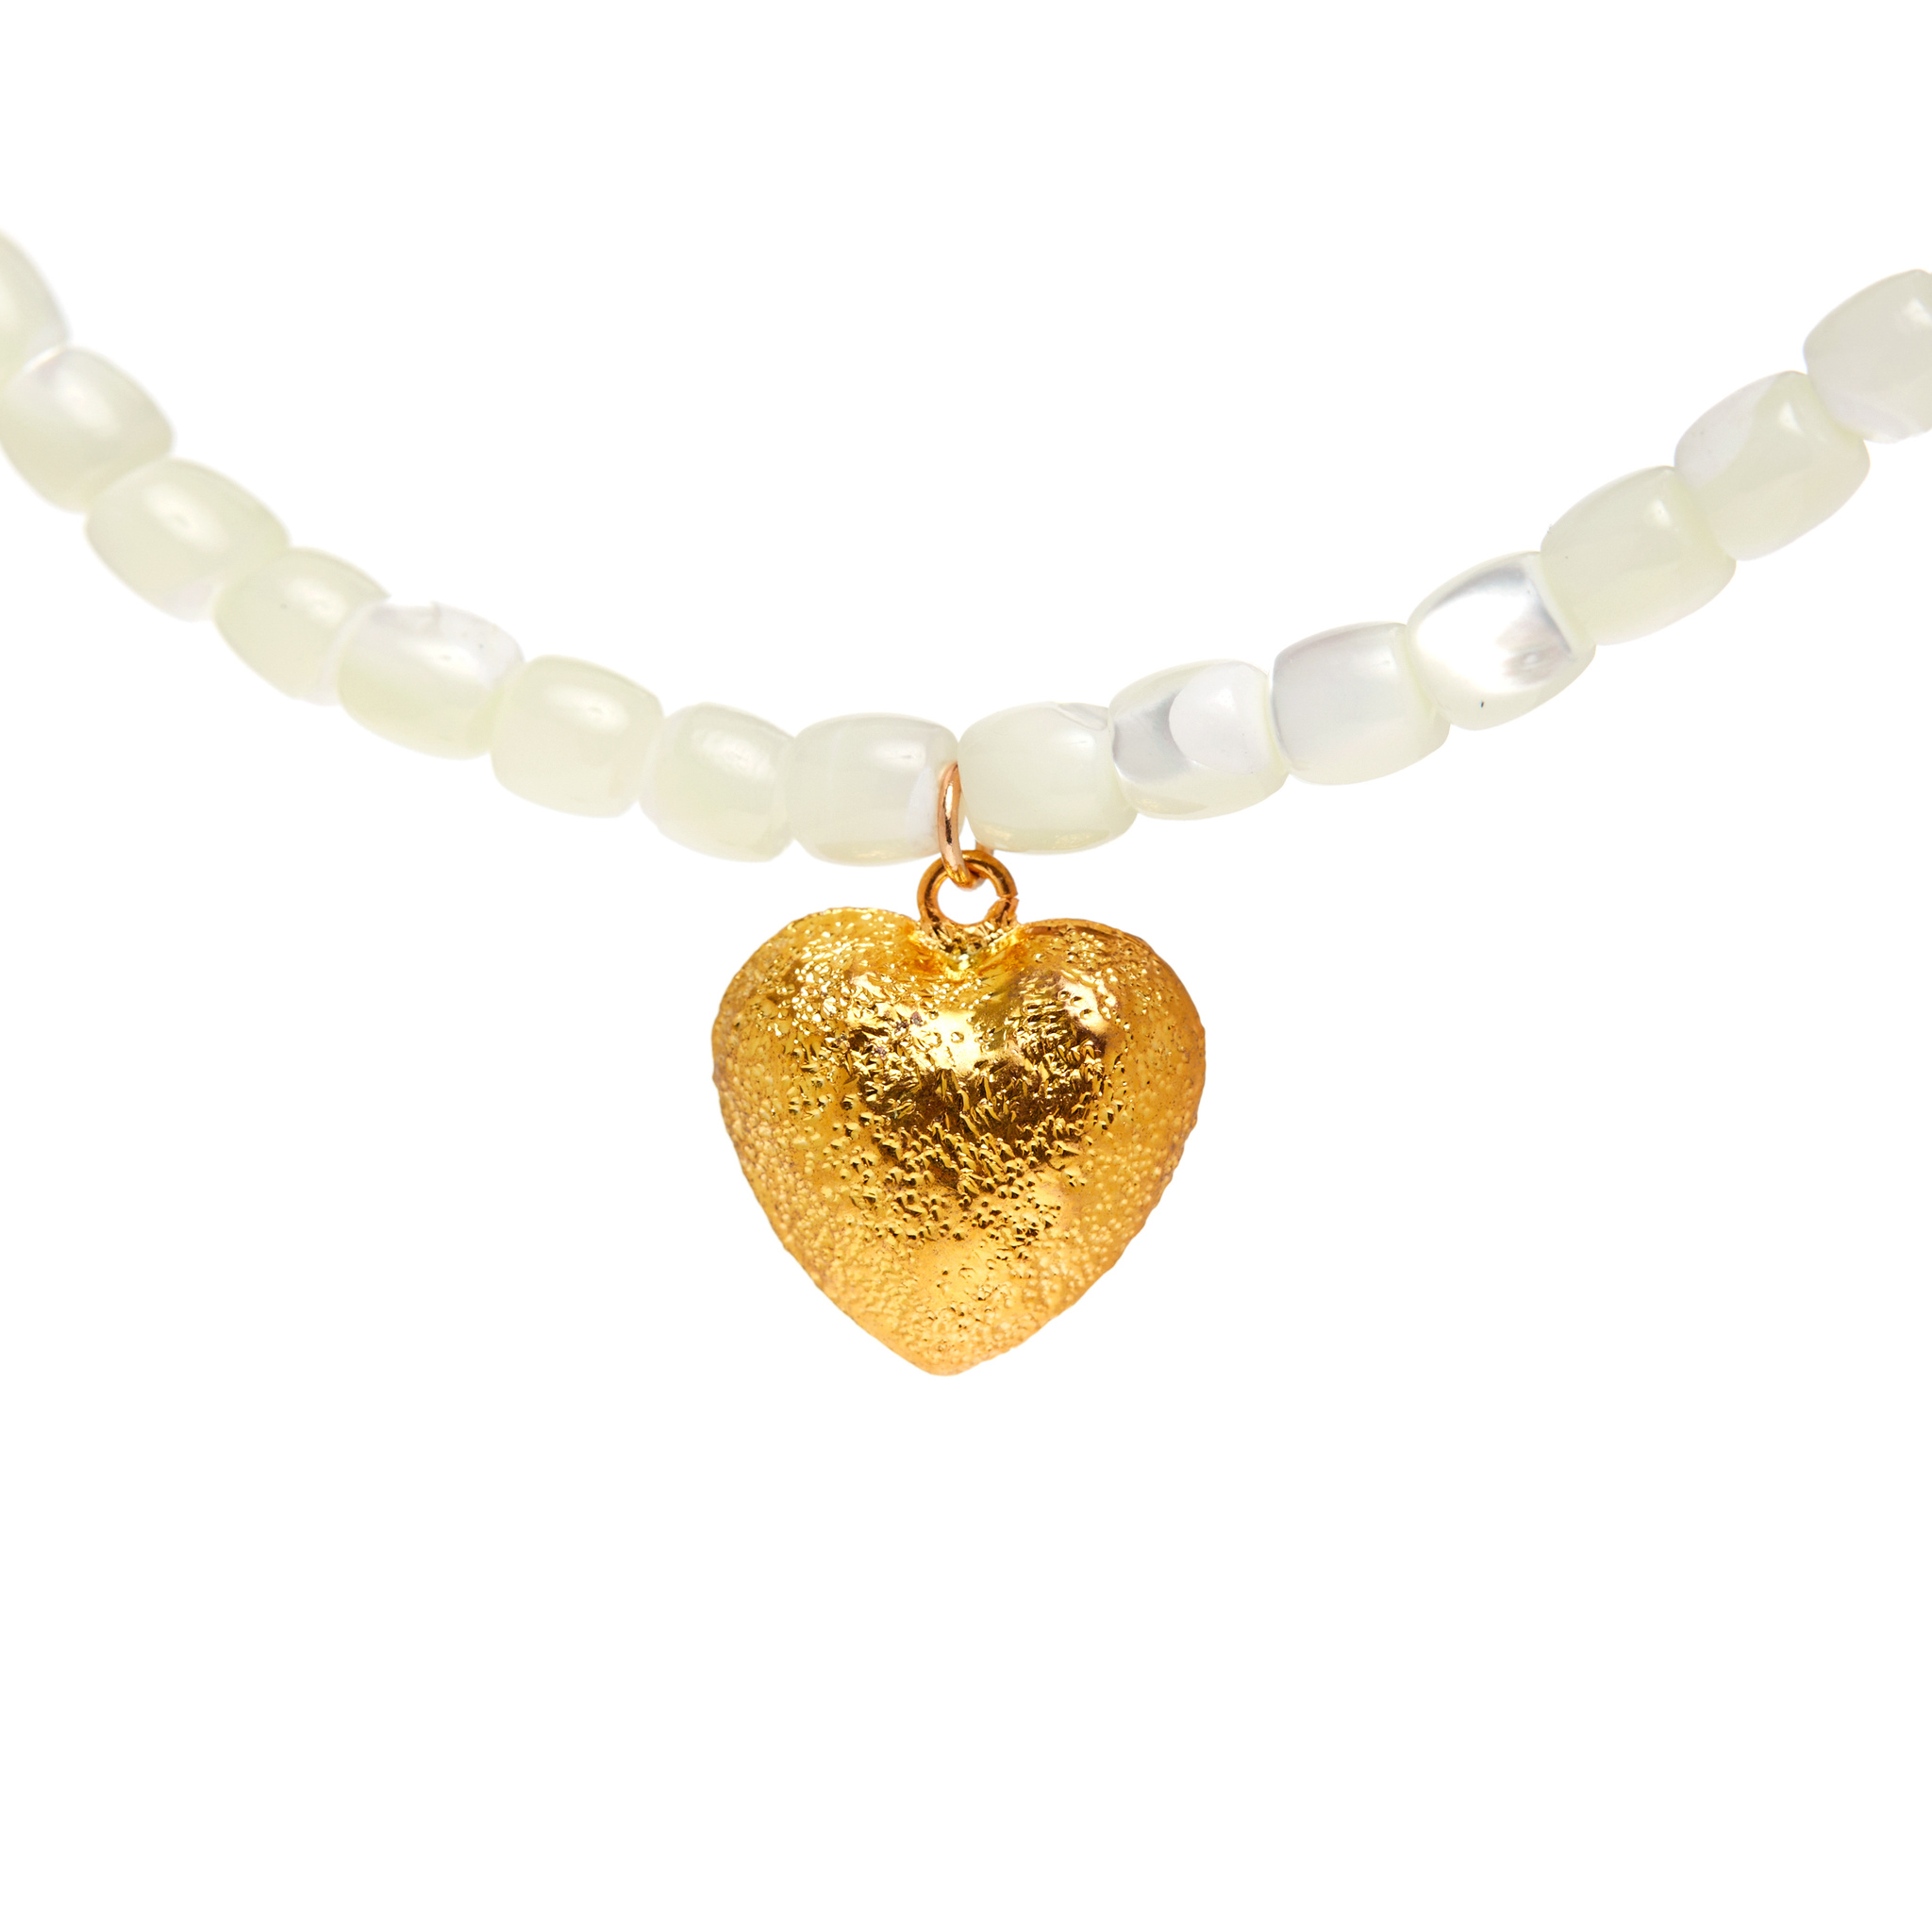 HOLLY JUNE Колье Beads And Gold Heart Necklace цена и фото